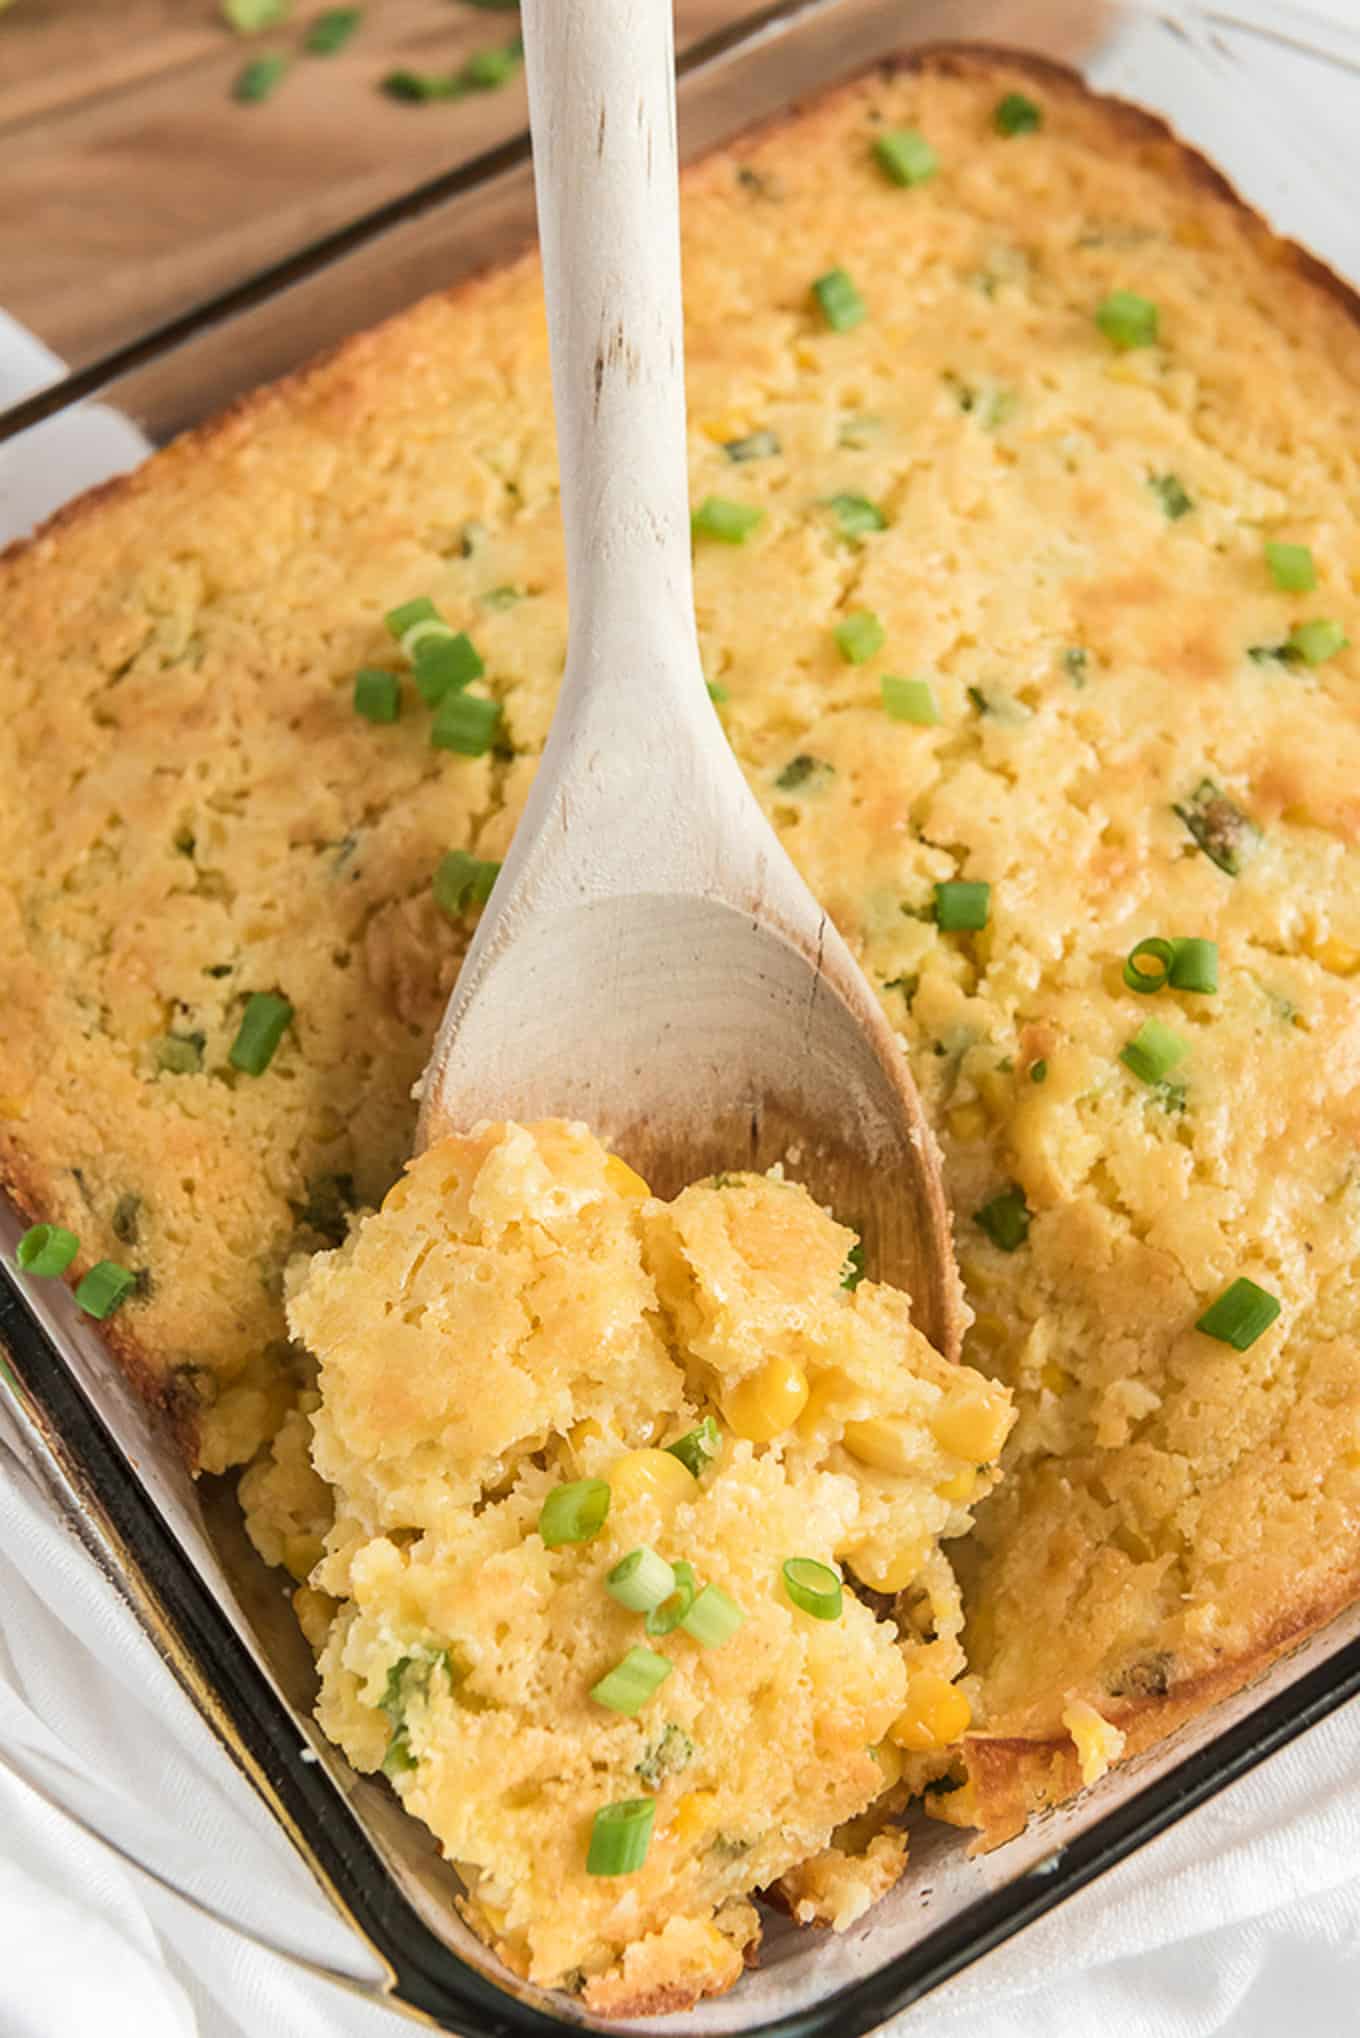 A spoon lifting a serving of Jiffy corn casserole up from the baking dish.